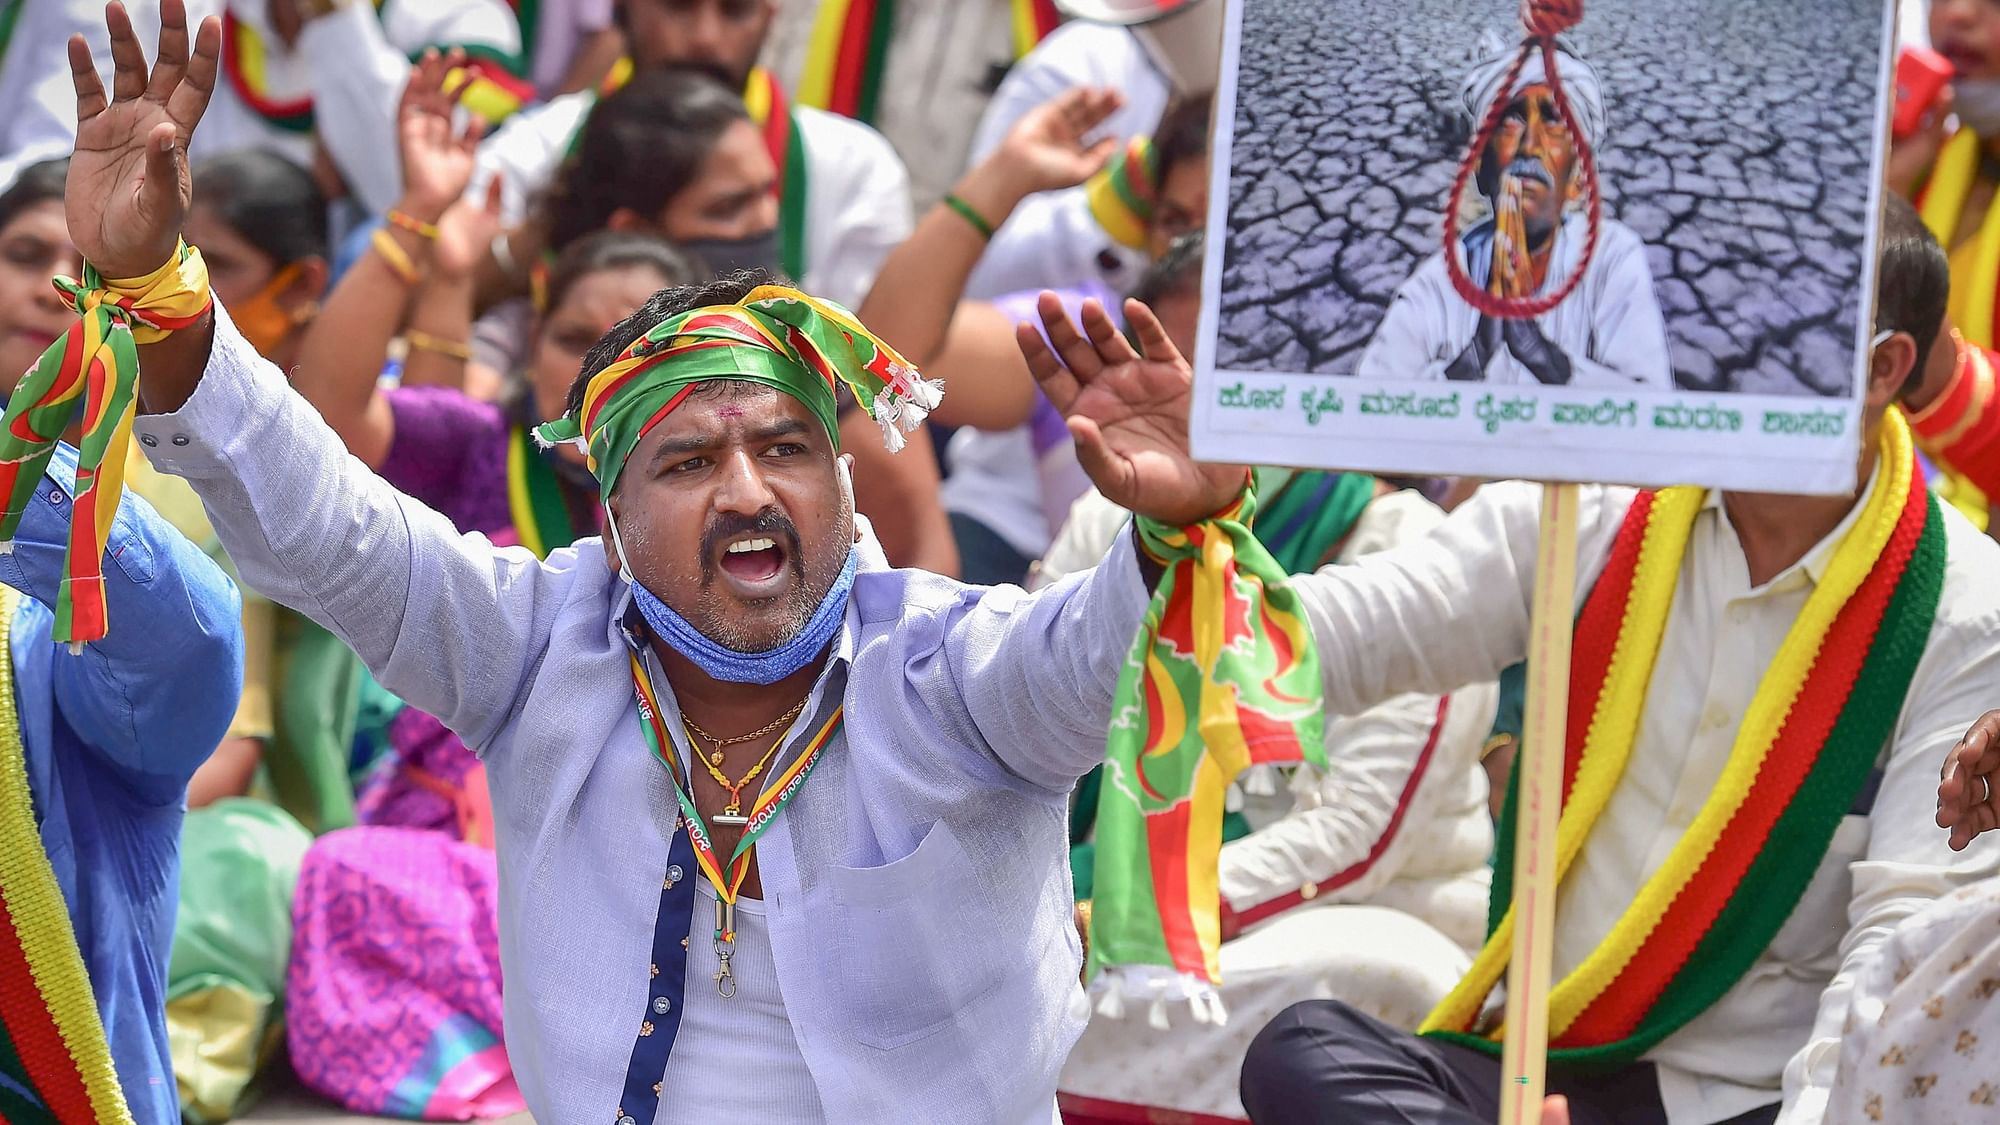 Members of various organisations along with farmers raise slogans during a protest against the farm reform bills passed in Parliament recently, in Bengaluru, Monday, 28 September, 2020.